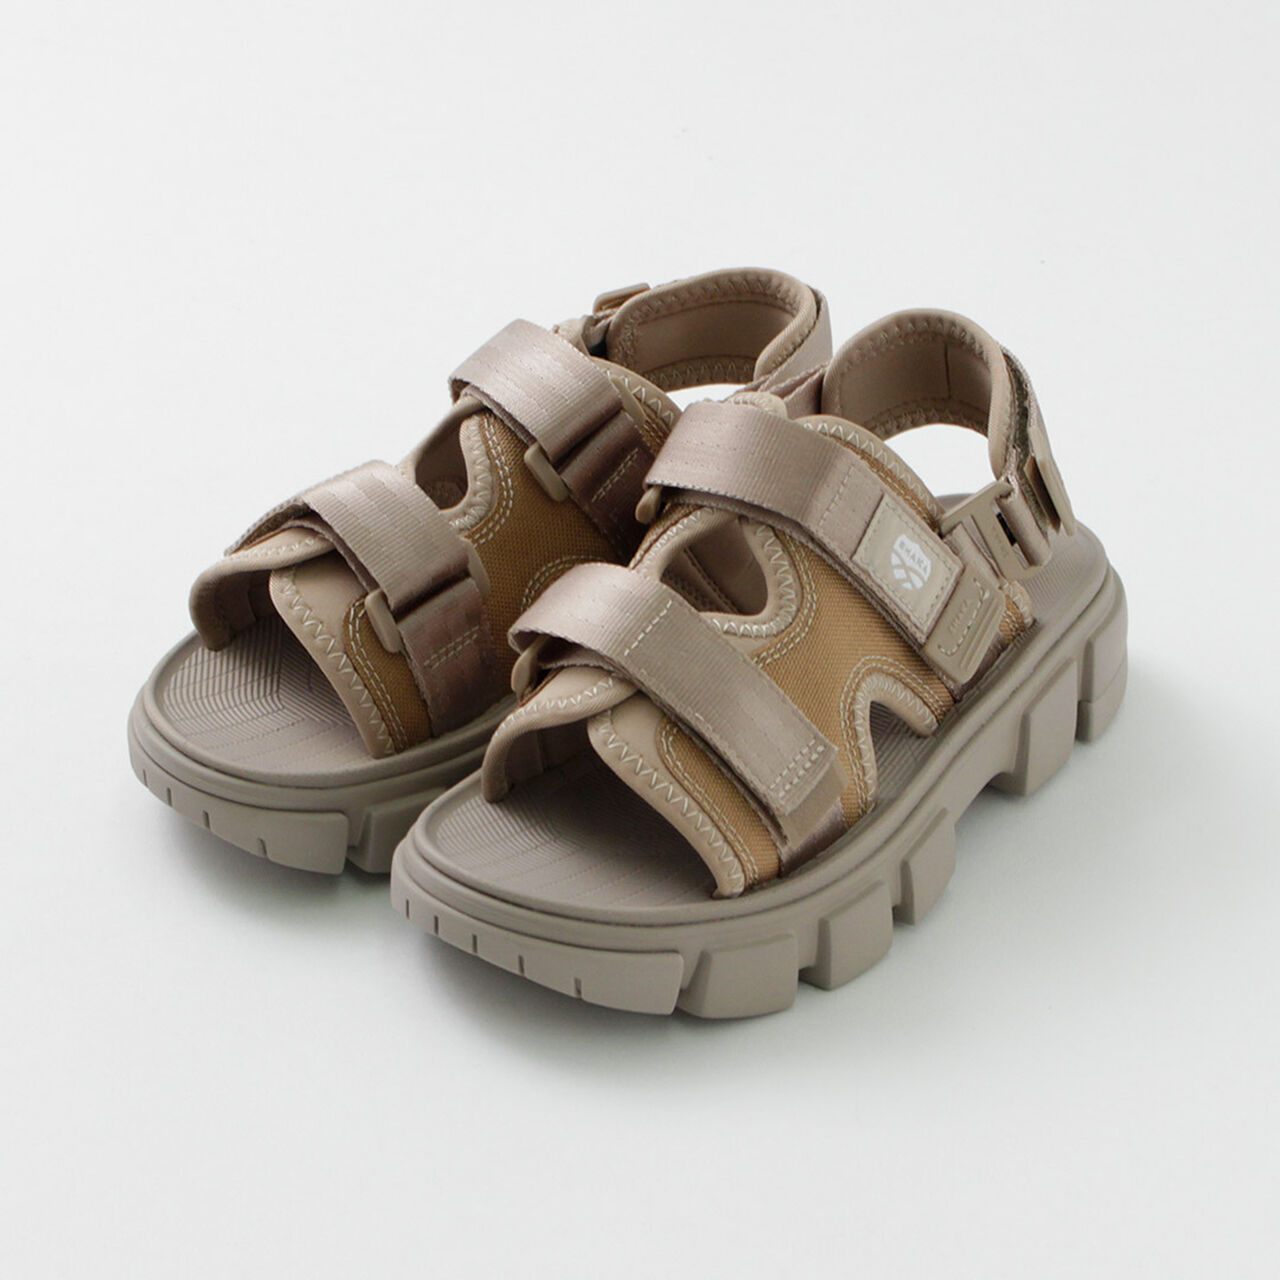 Chill Out SF Sandals,Taupe, large image number 0